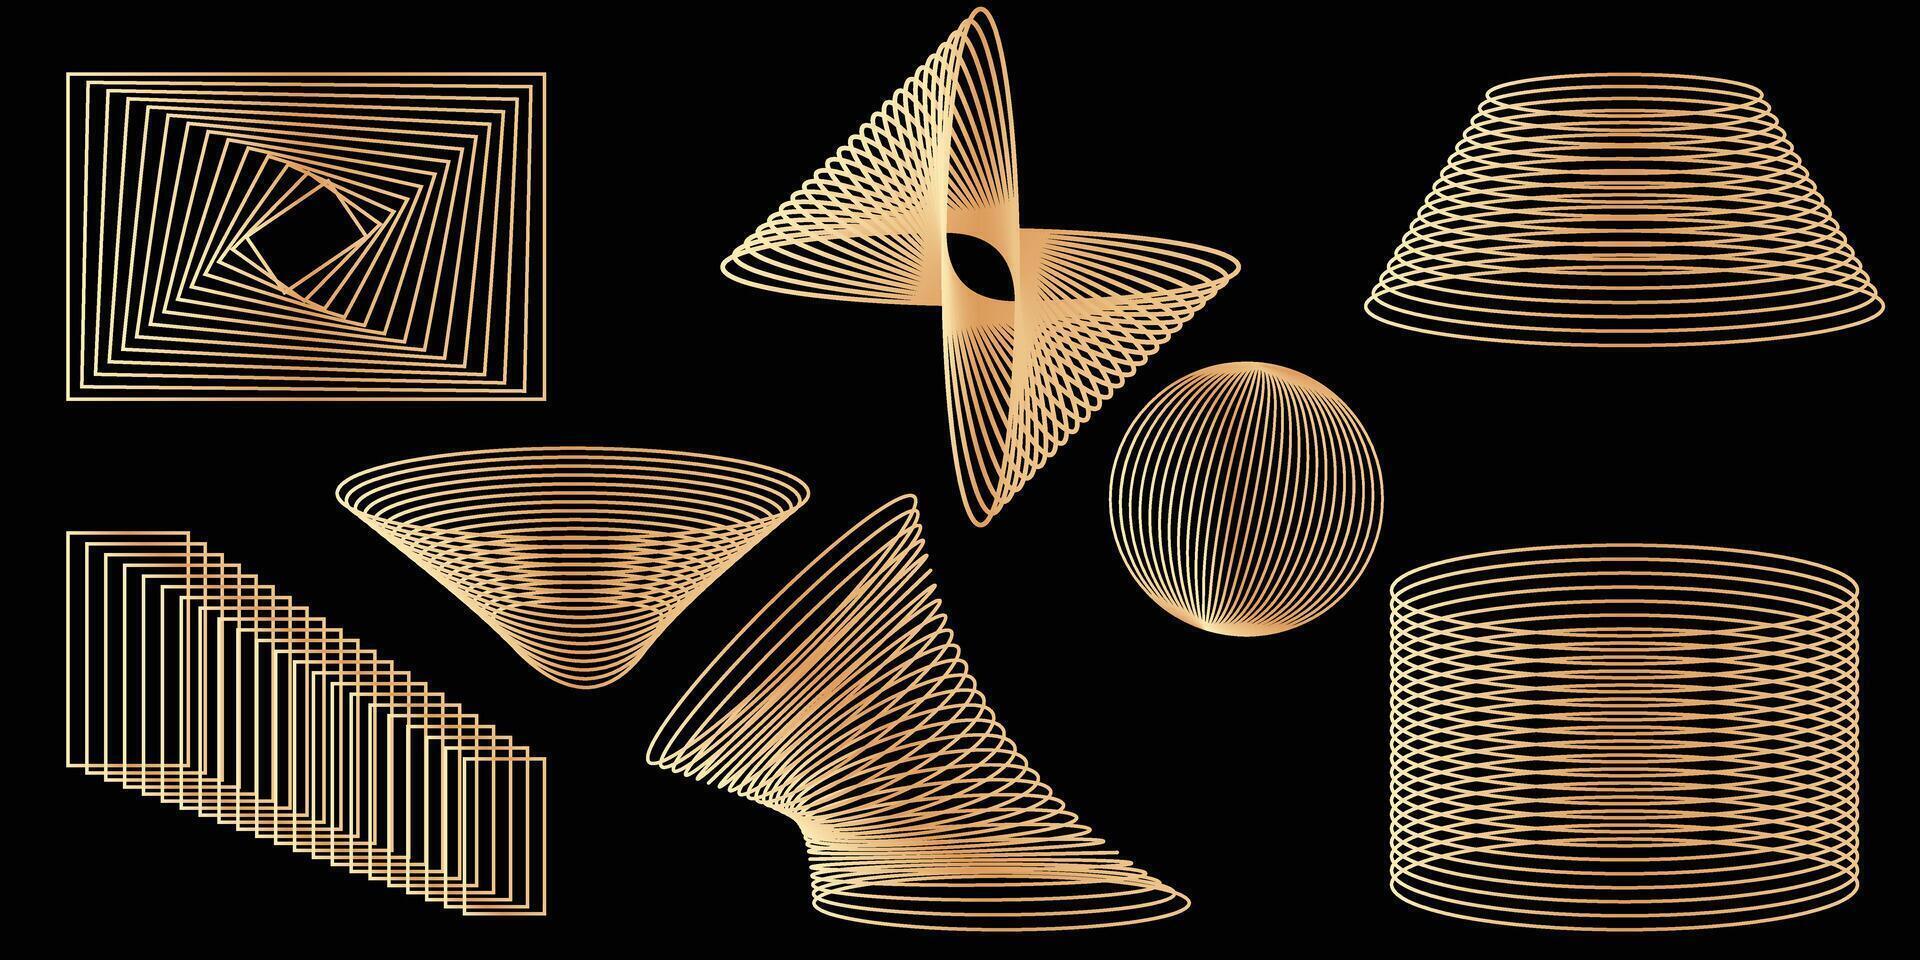 Decorative golden shapes set. Bauhaus inspired graphic design collection with abstract vector elements, lines and forms for poster art, front page design, wall decorative prints.